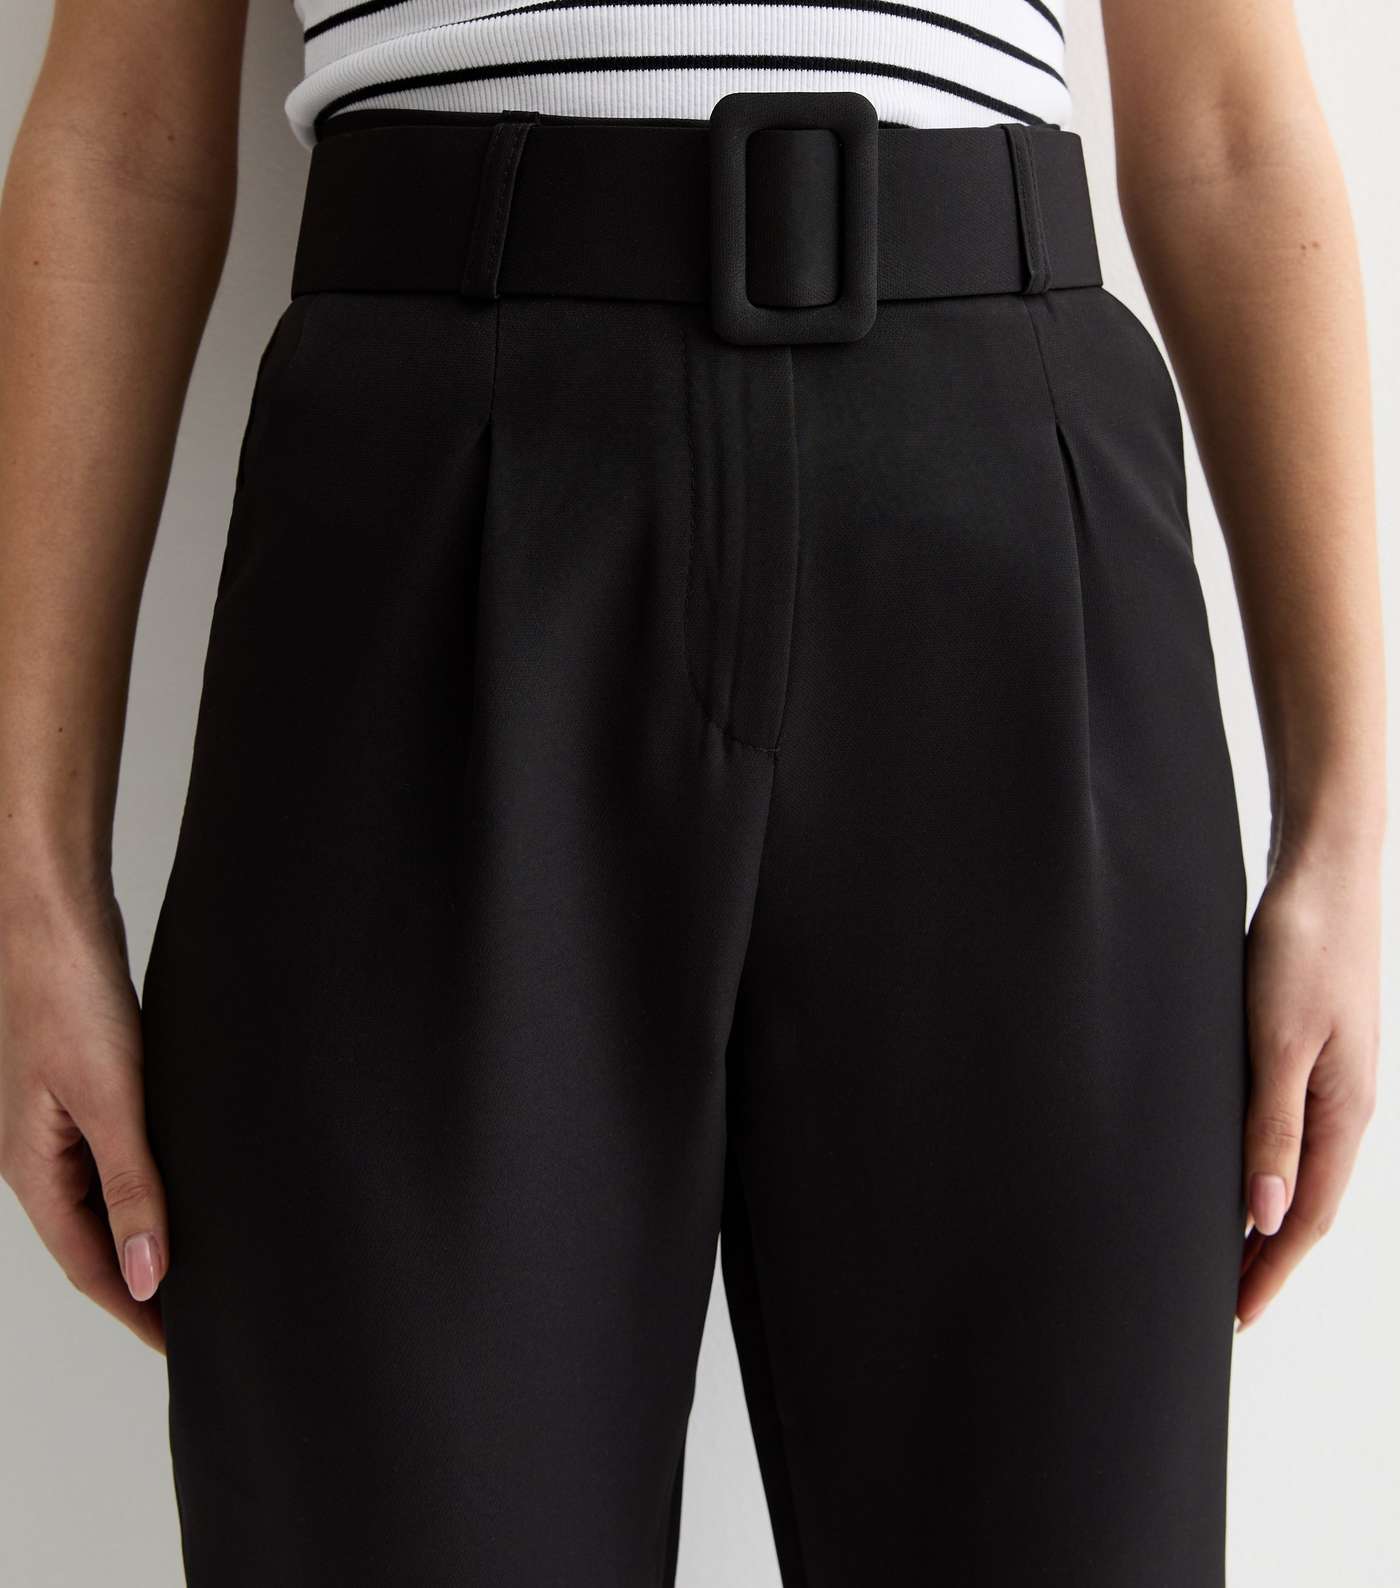 Gini London Black Tapered Trousers Image 3